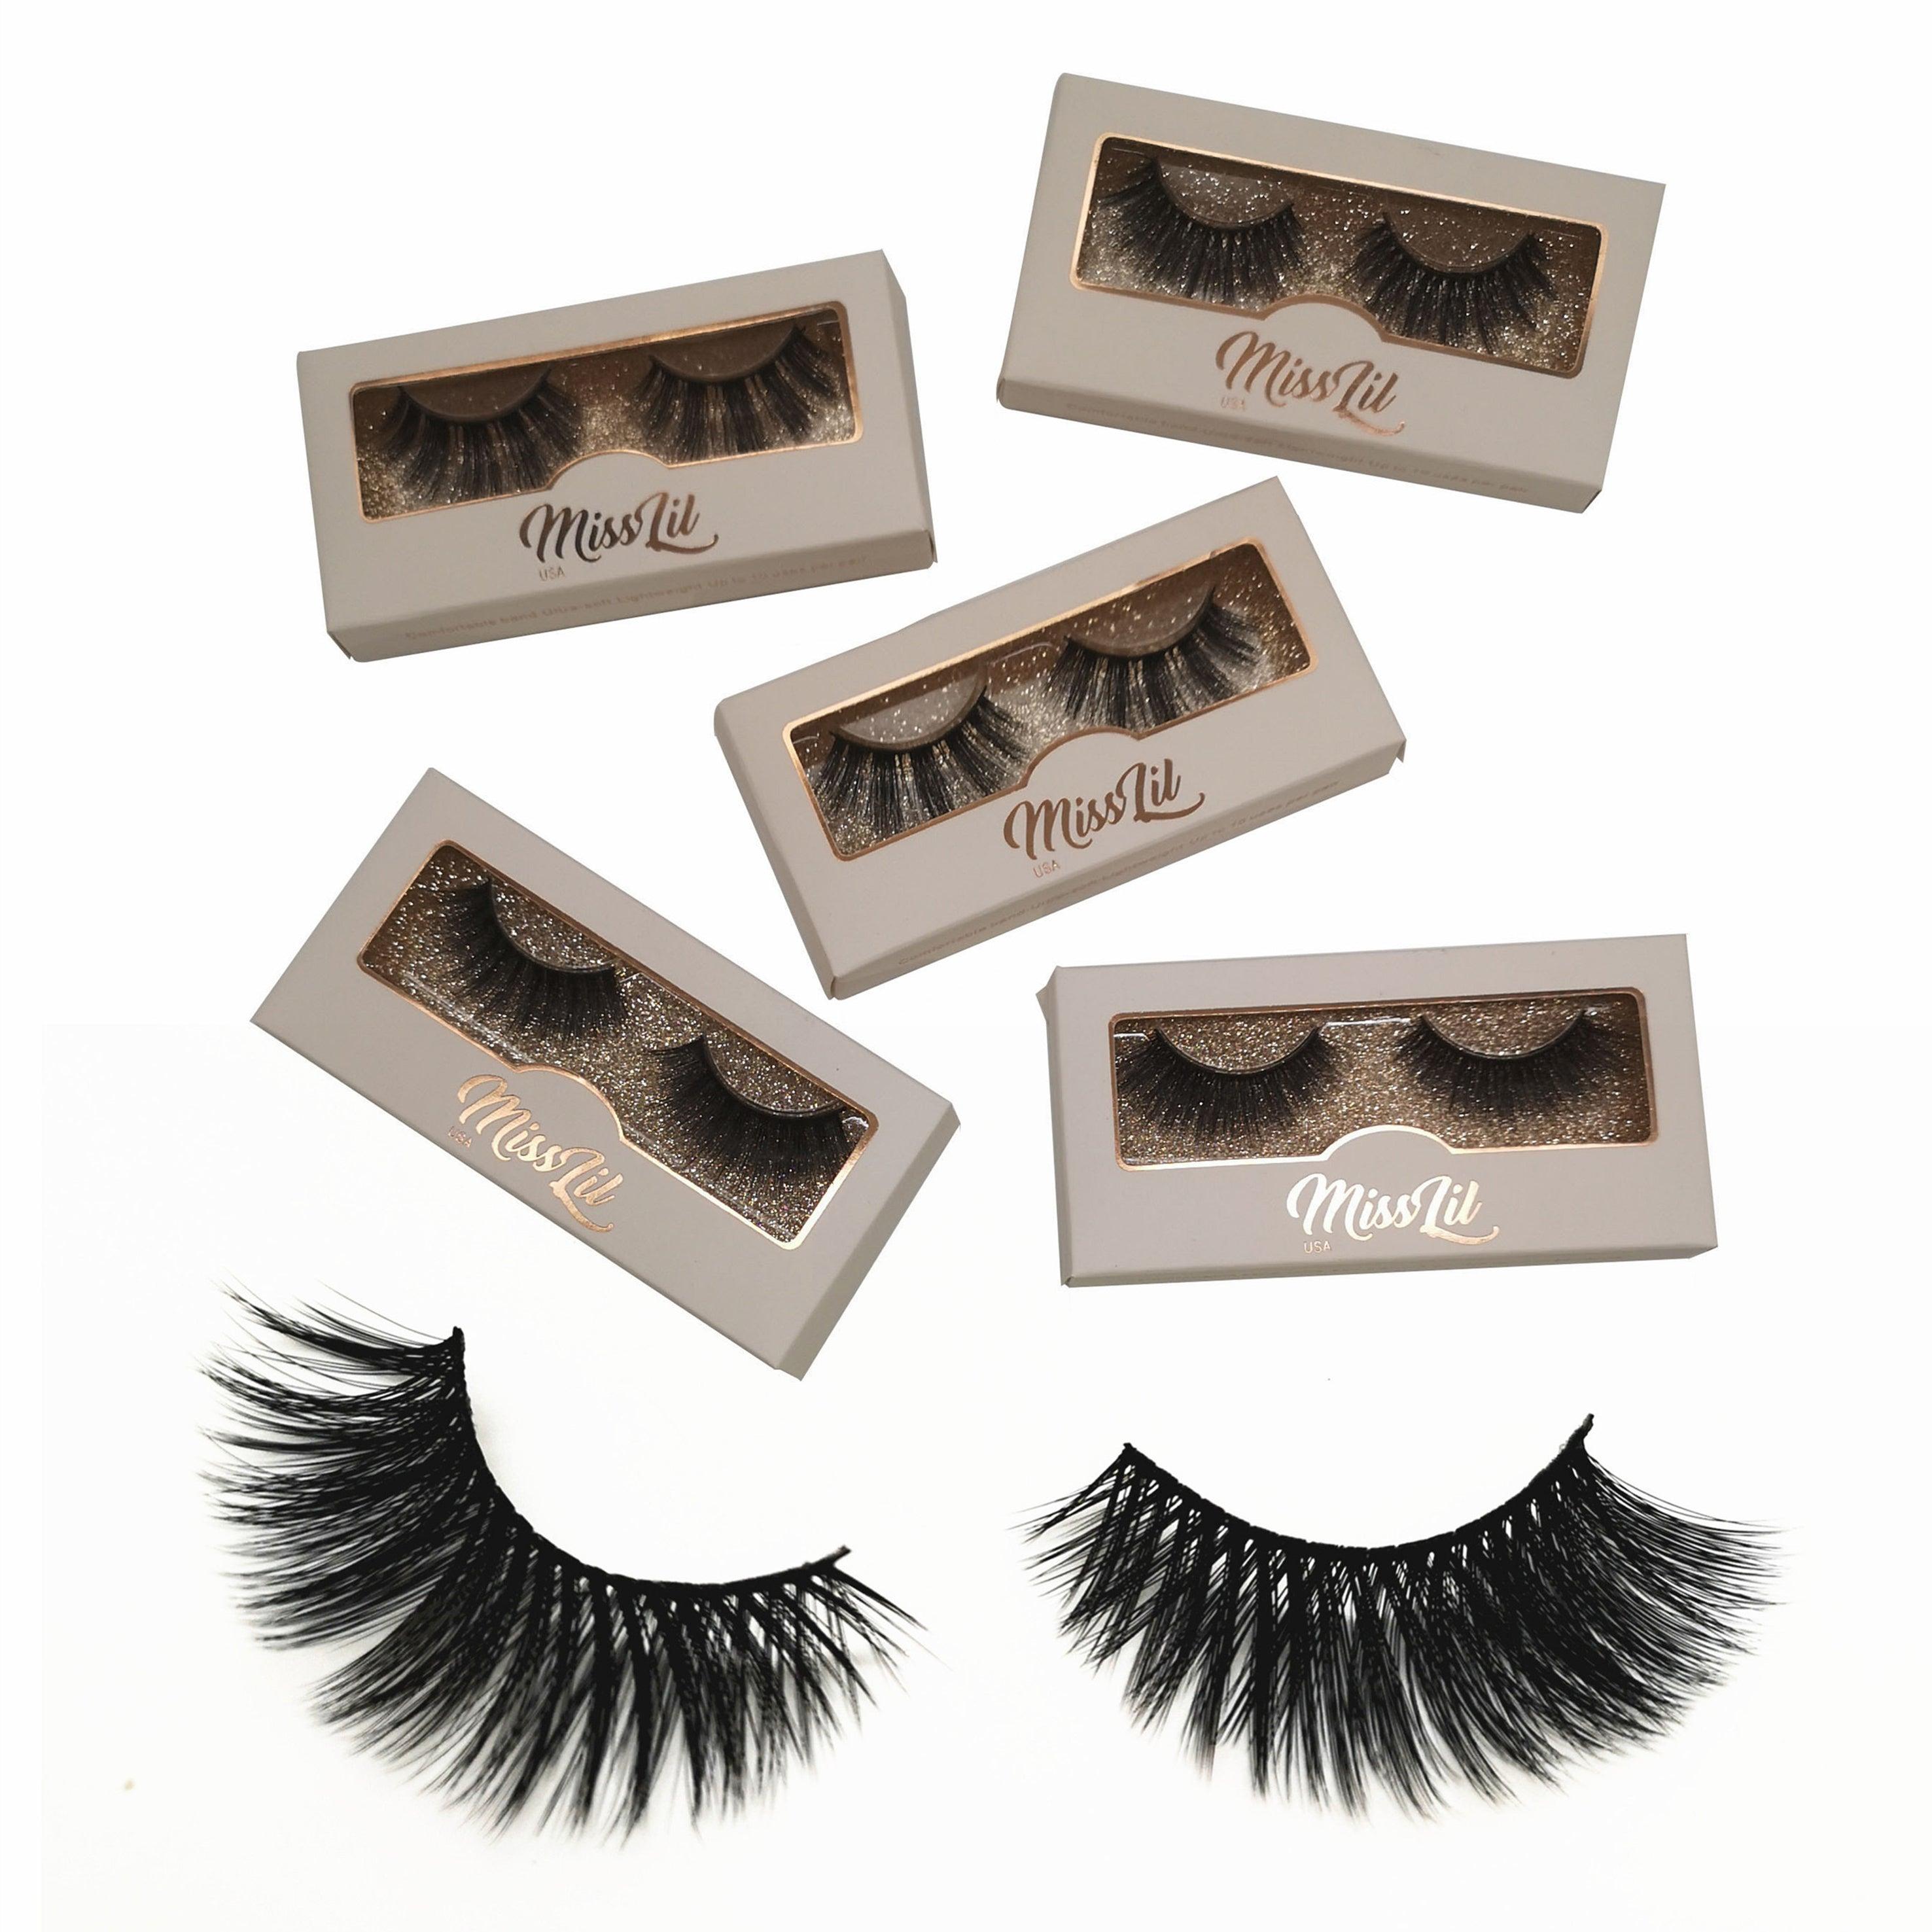 1 Pair Miss Lil USA Lashes #7 (Pack of 12) - Miss Lil USA Wholesale